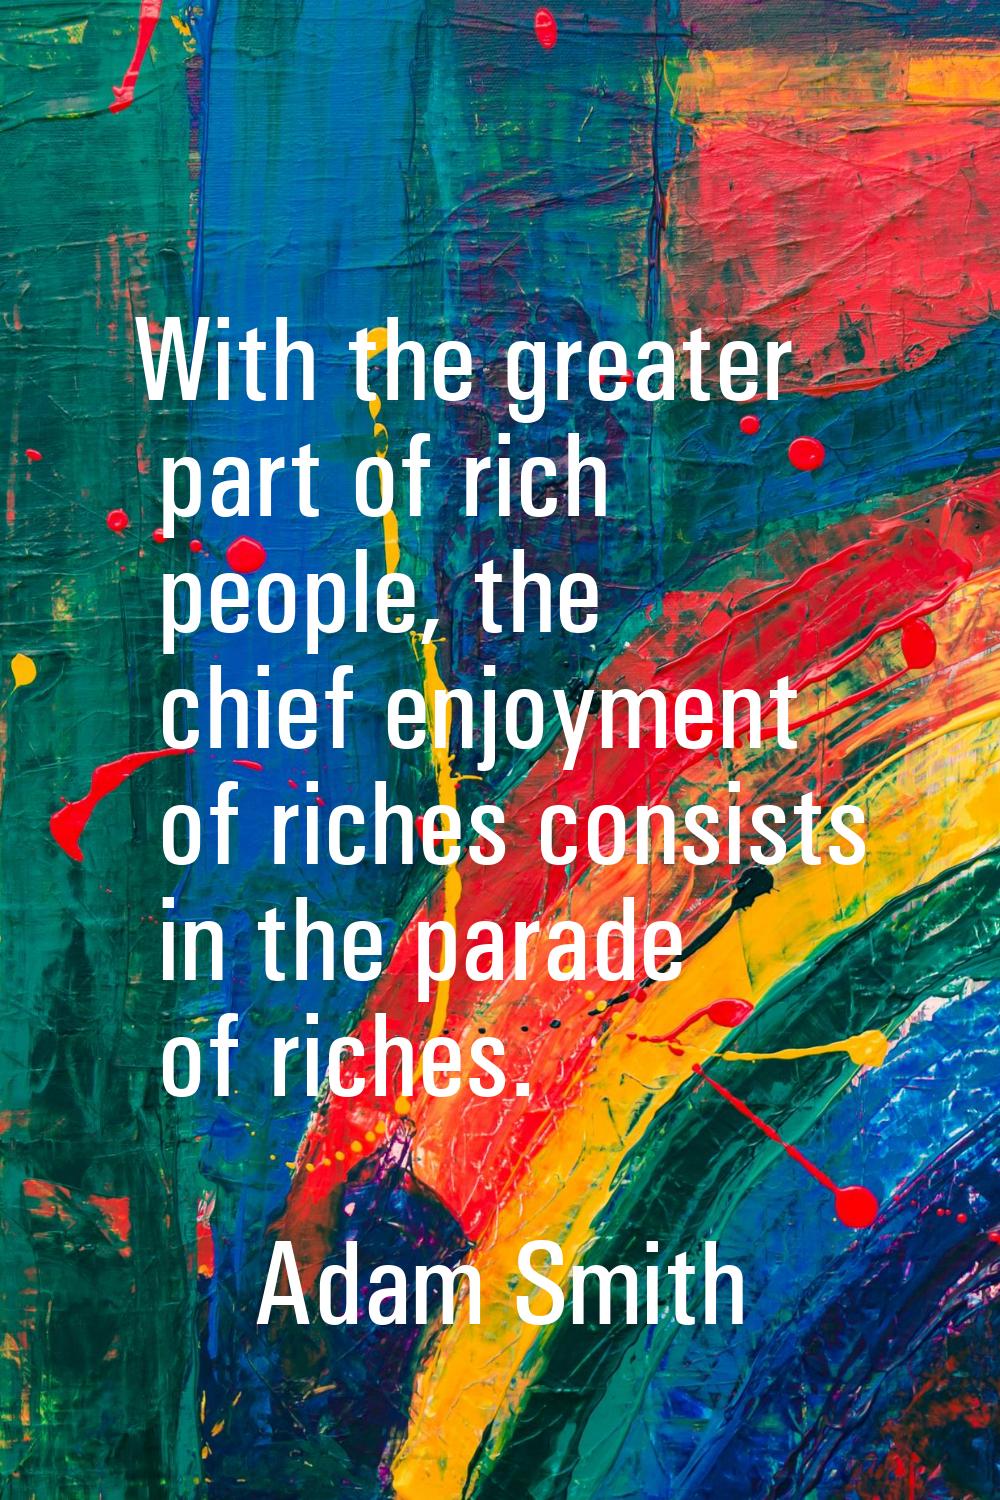 With the greater part of rich people, the chief enjoyment of riches consists in the parade of riche